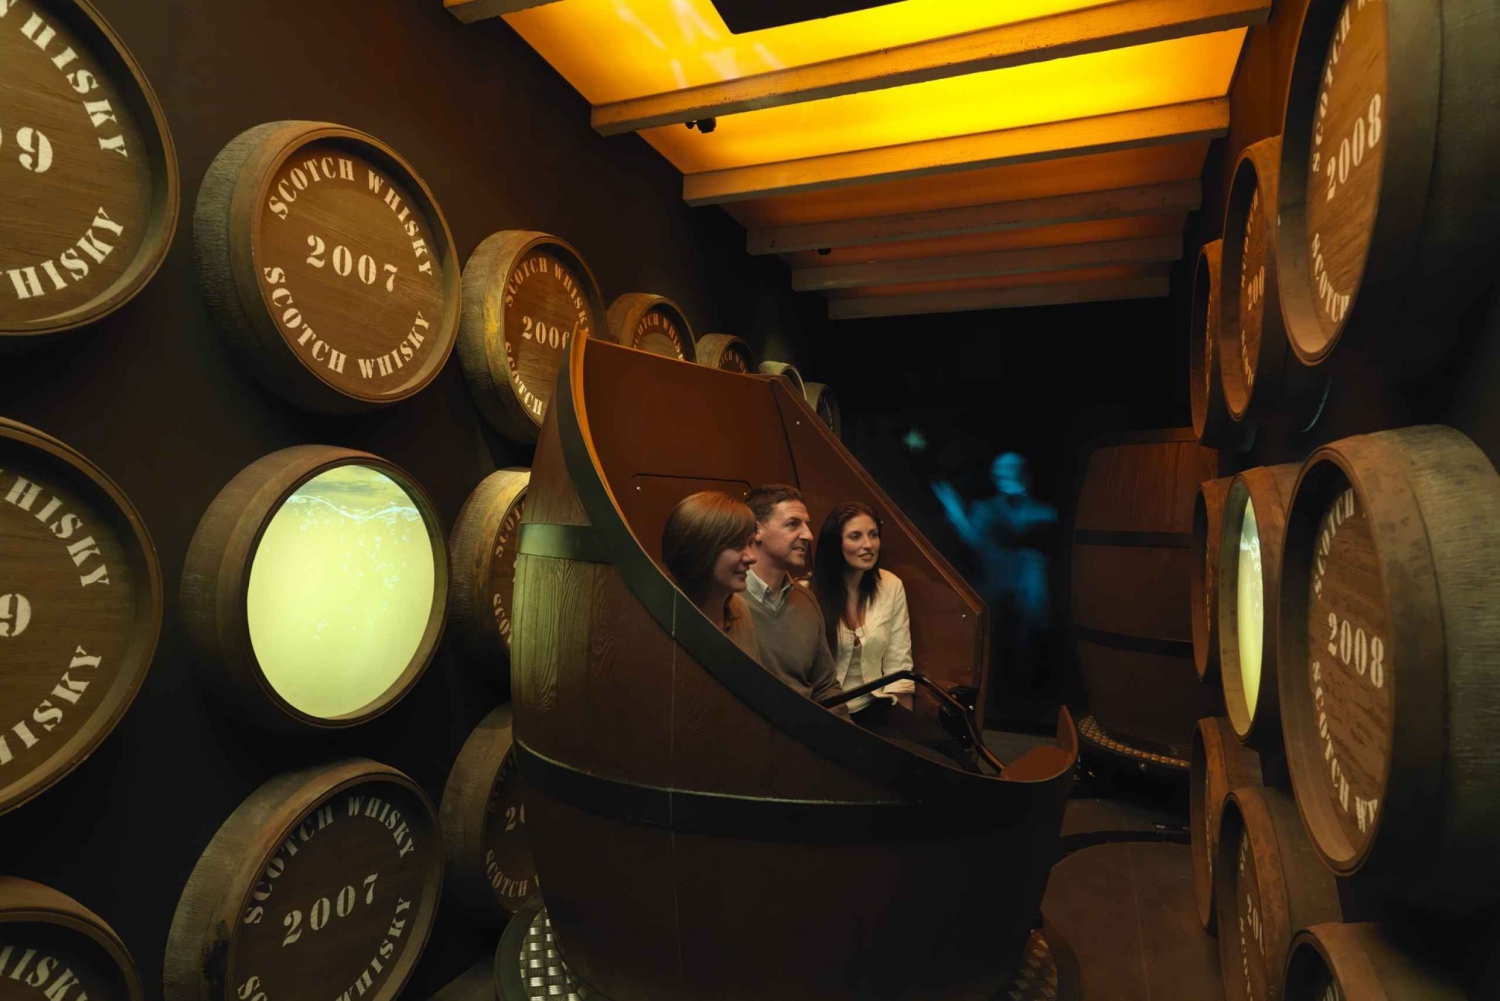 The Scotch Whisky Experience: Guided Tour and Whisky Tasting